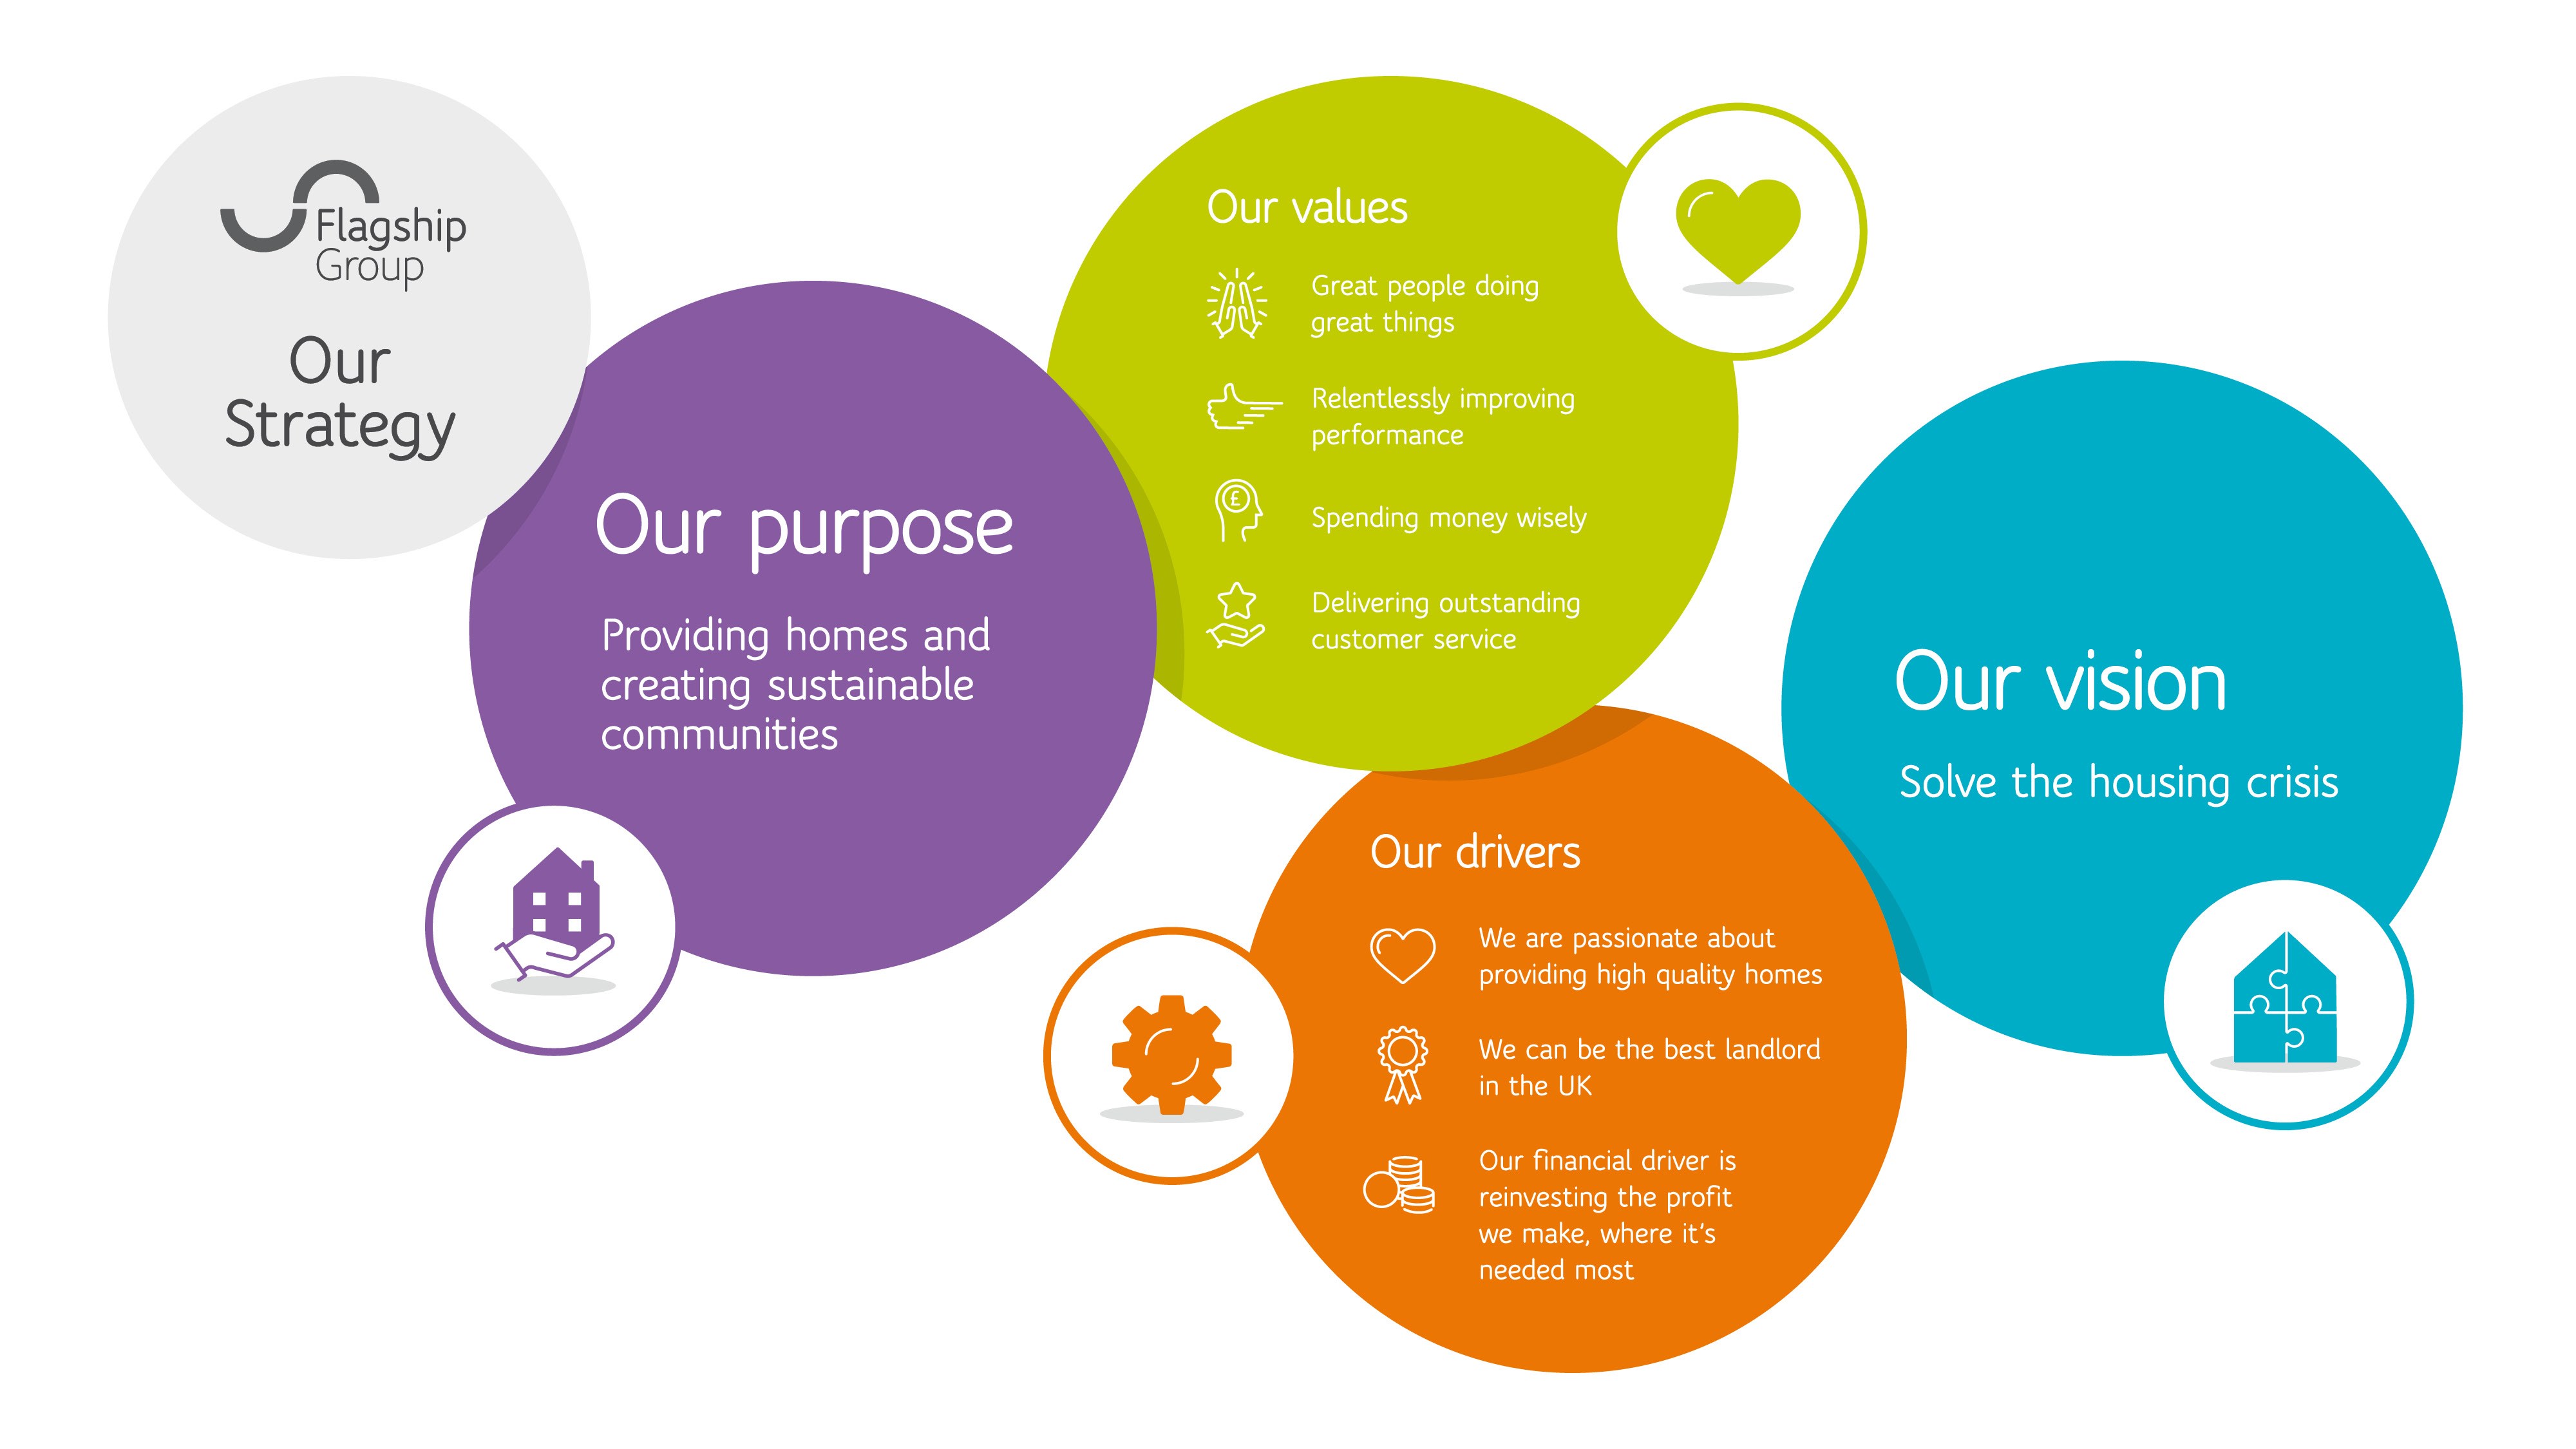 Graphic showing Flagship Group's updated strategy design for October 2023. There are 5 circular elements going left to right; the title Our Strategy in a grey circle wthe the Flagship logo. Our purpose (providing homes and creating sustainable communities) in a purple circle with an icon of a hand holding a house. Our values (great people doing great things, relentlessly improving performance, spending money wisely, delivering outstanding customer service) in a green circle with a heart icon. Our drivers (we are passionate about providing high-quality homes, we can be the best landlord in the UK, our financial driver is reinvesting the profit we make where it's needed most, in an orange circle with a cog icon. Our vision (solving the housing crisis) in a blue circle with an icon of a house made by four interlocking jigsaw pieces.